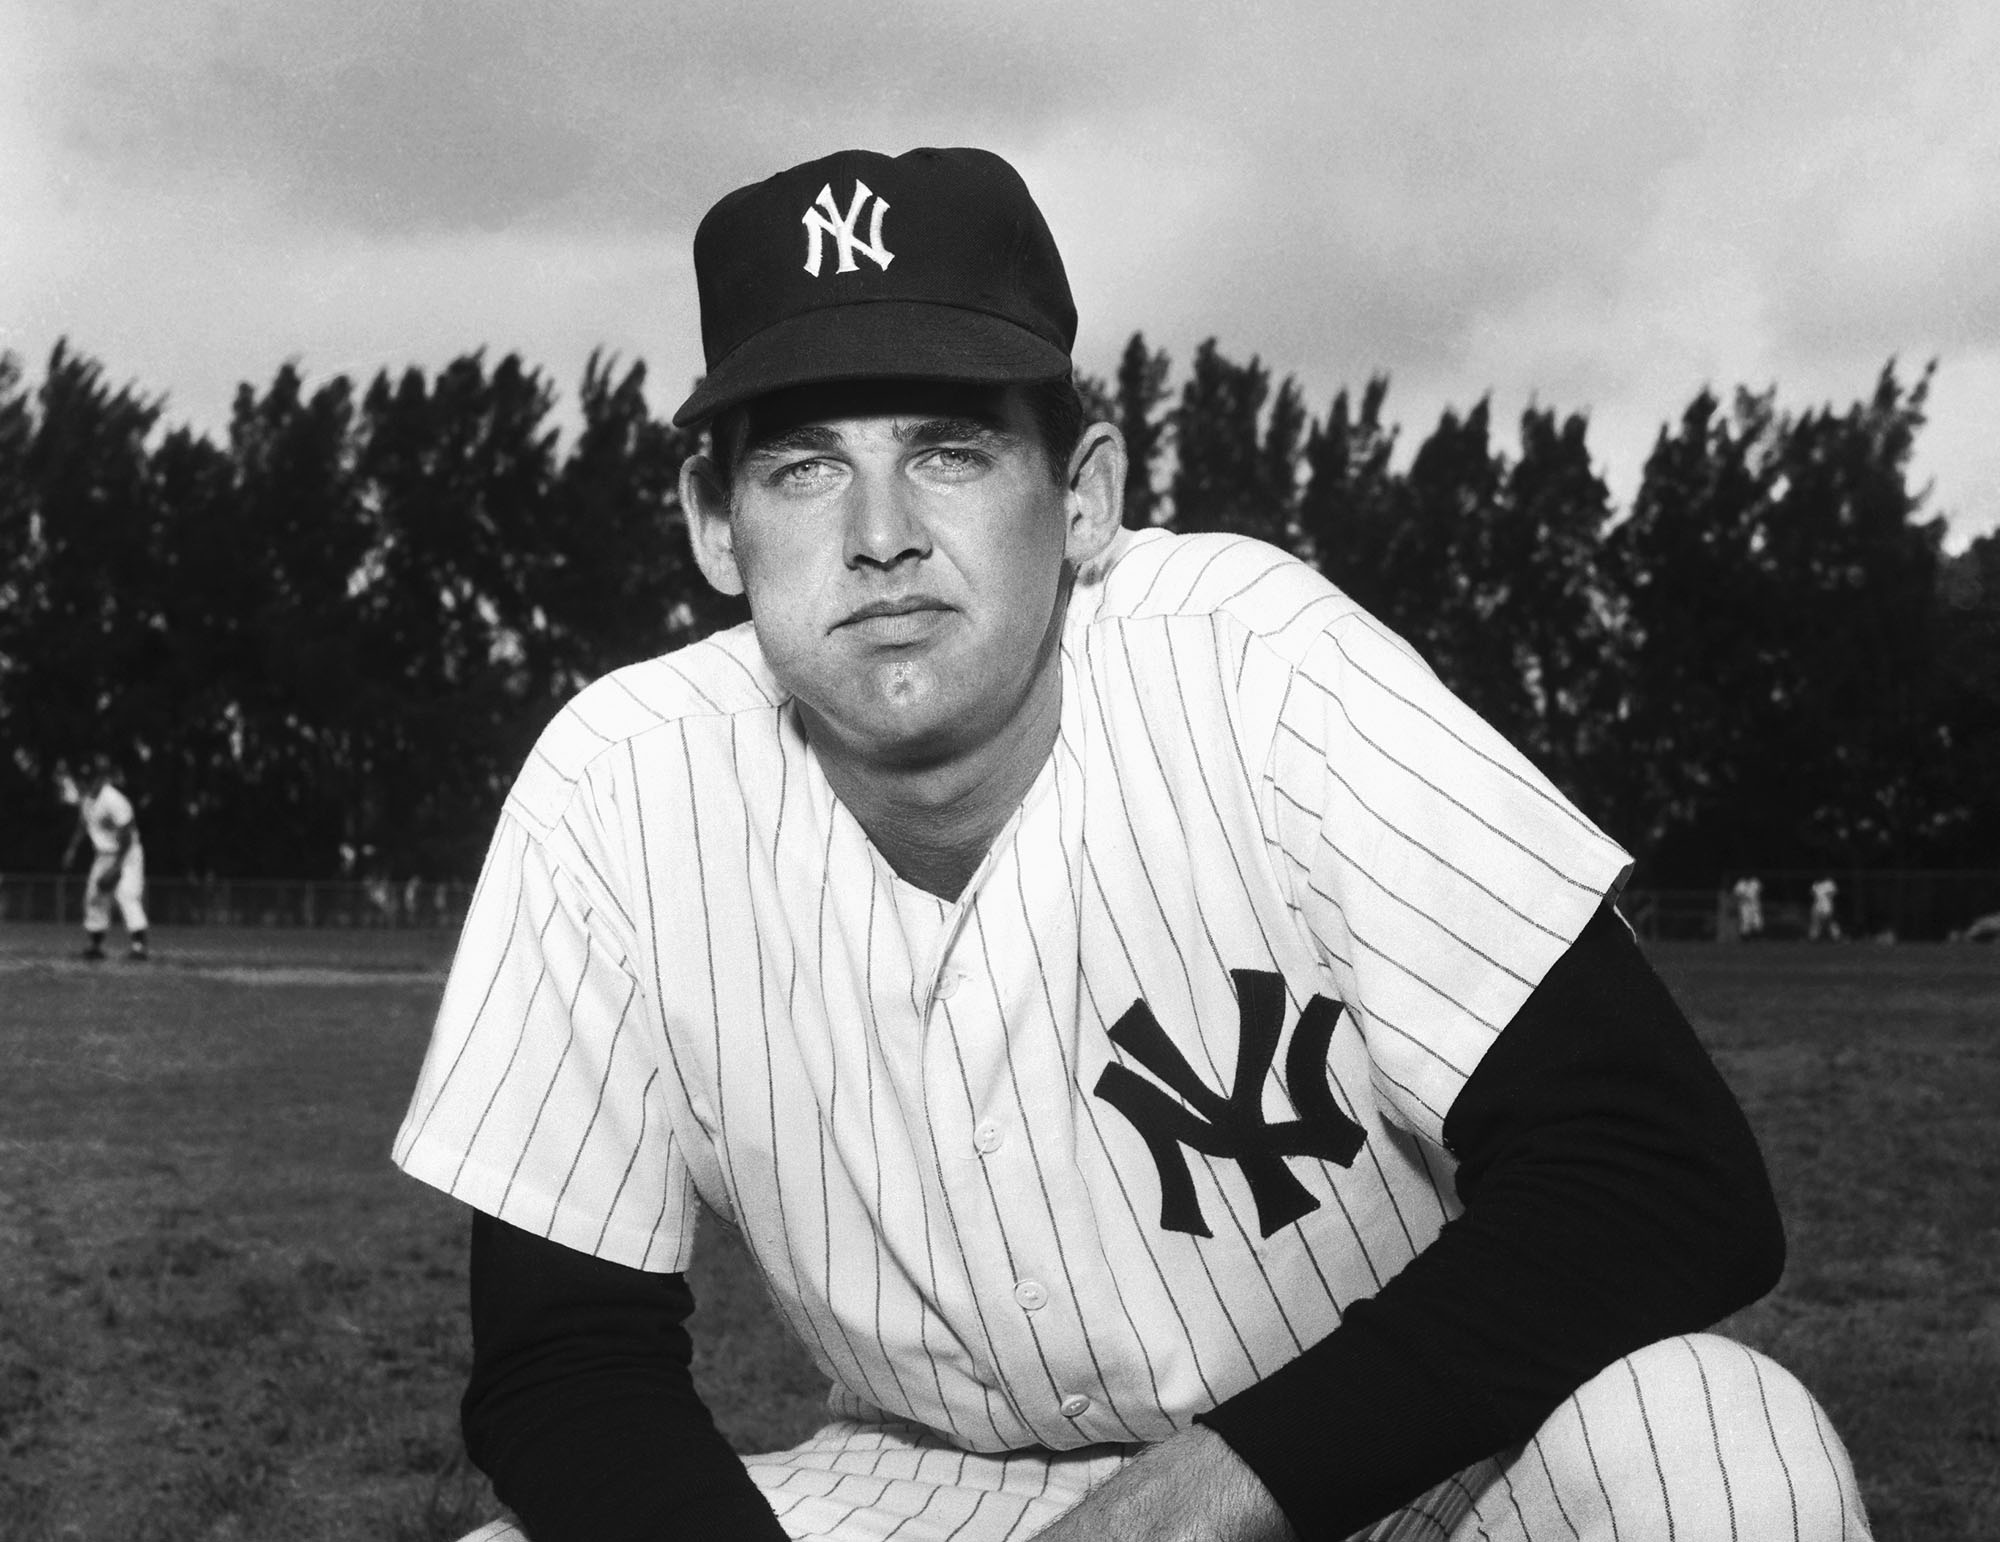 Don Larsen, Only Pitcher Perfect in World Series, Dies at 90